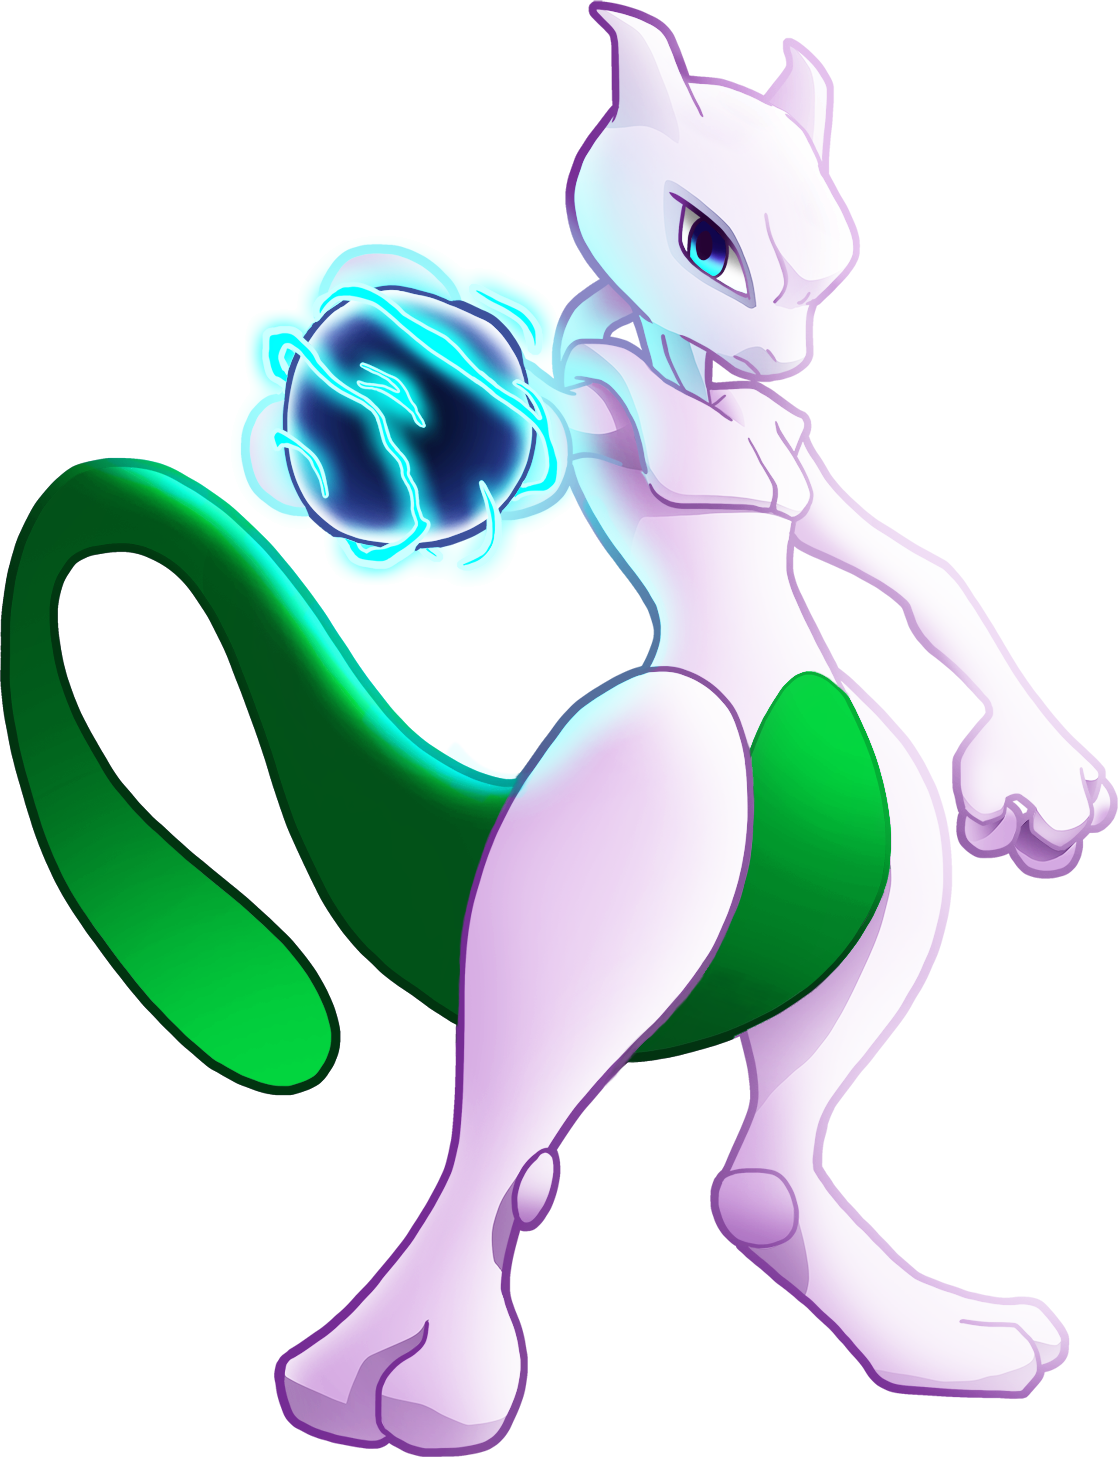 [Image: shiny_mewtwo_by_artistaladdin-d9a203c.png]